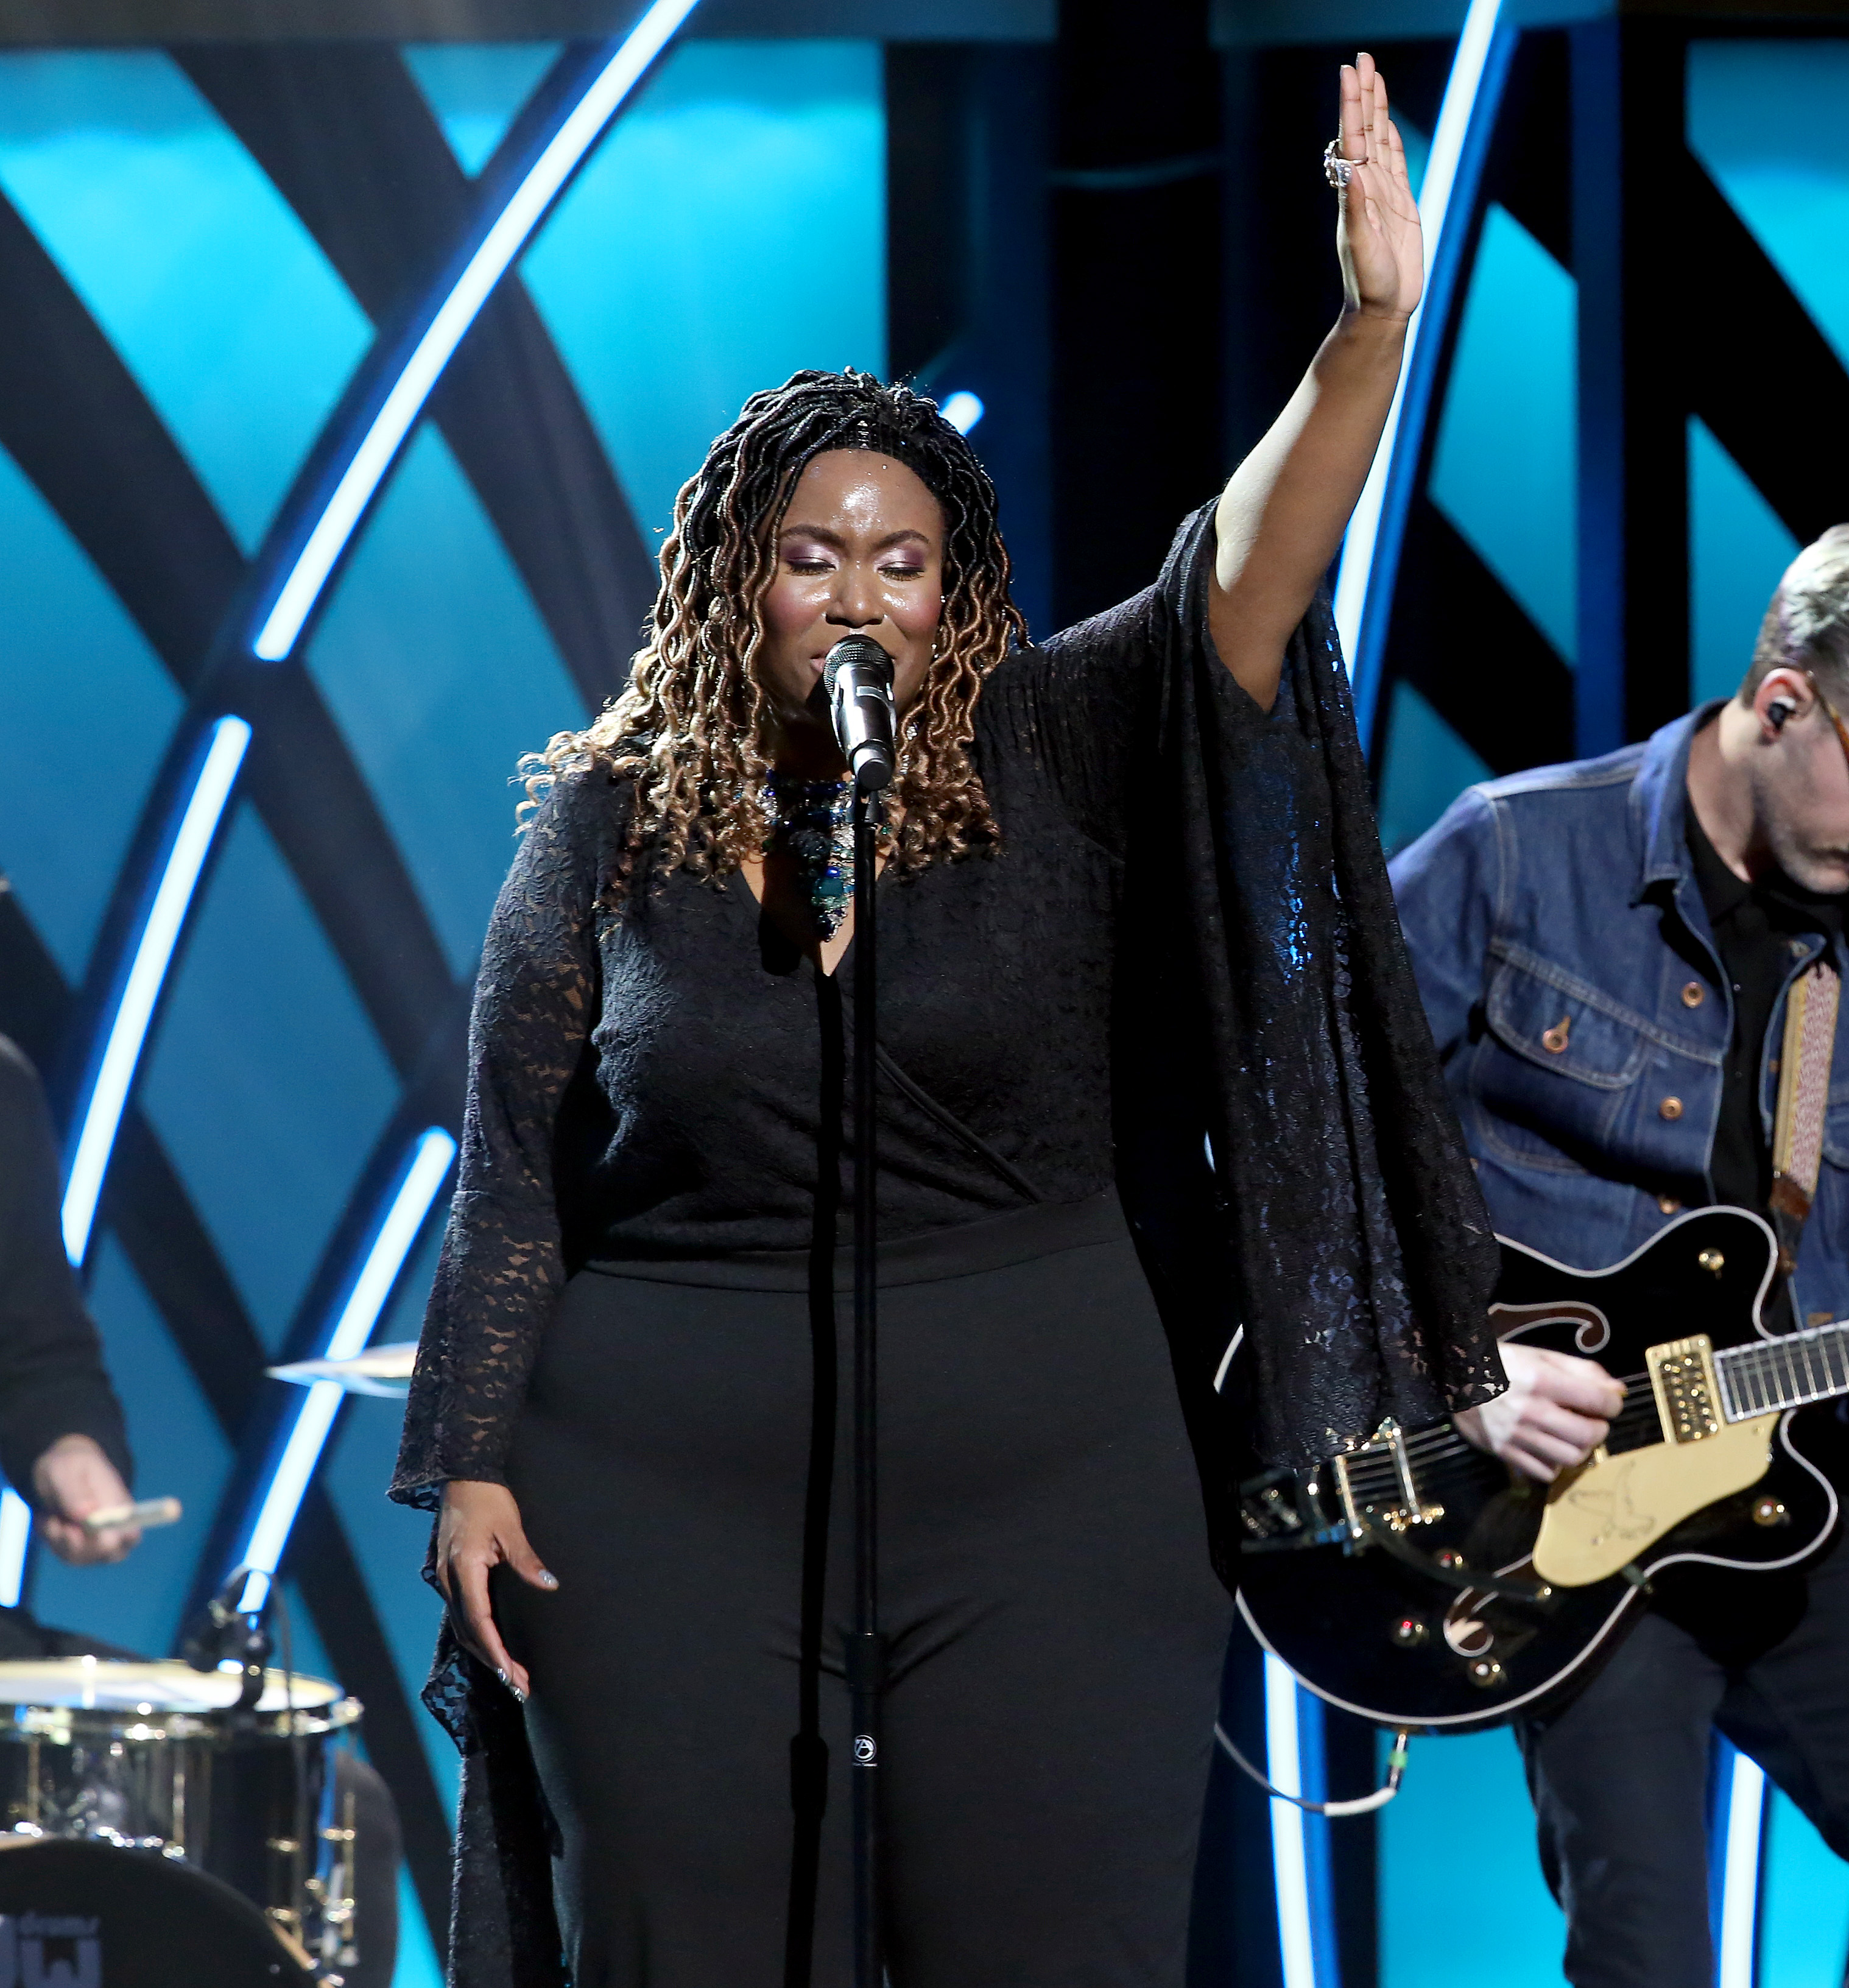 Mandisa performing at the 7th Annual K-LOVE Fan Awards in Nashville, Tennessee on June 2, 2019 | Source: Getty Images